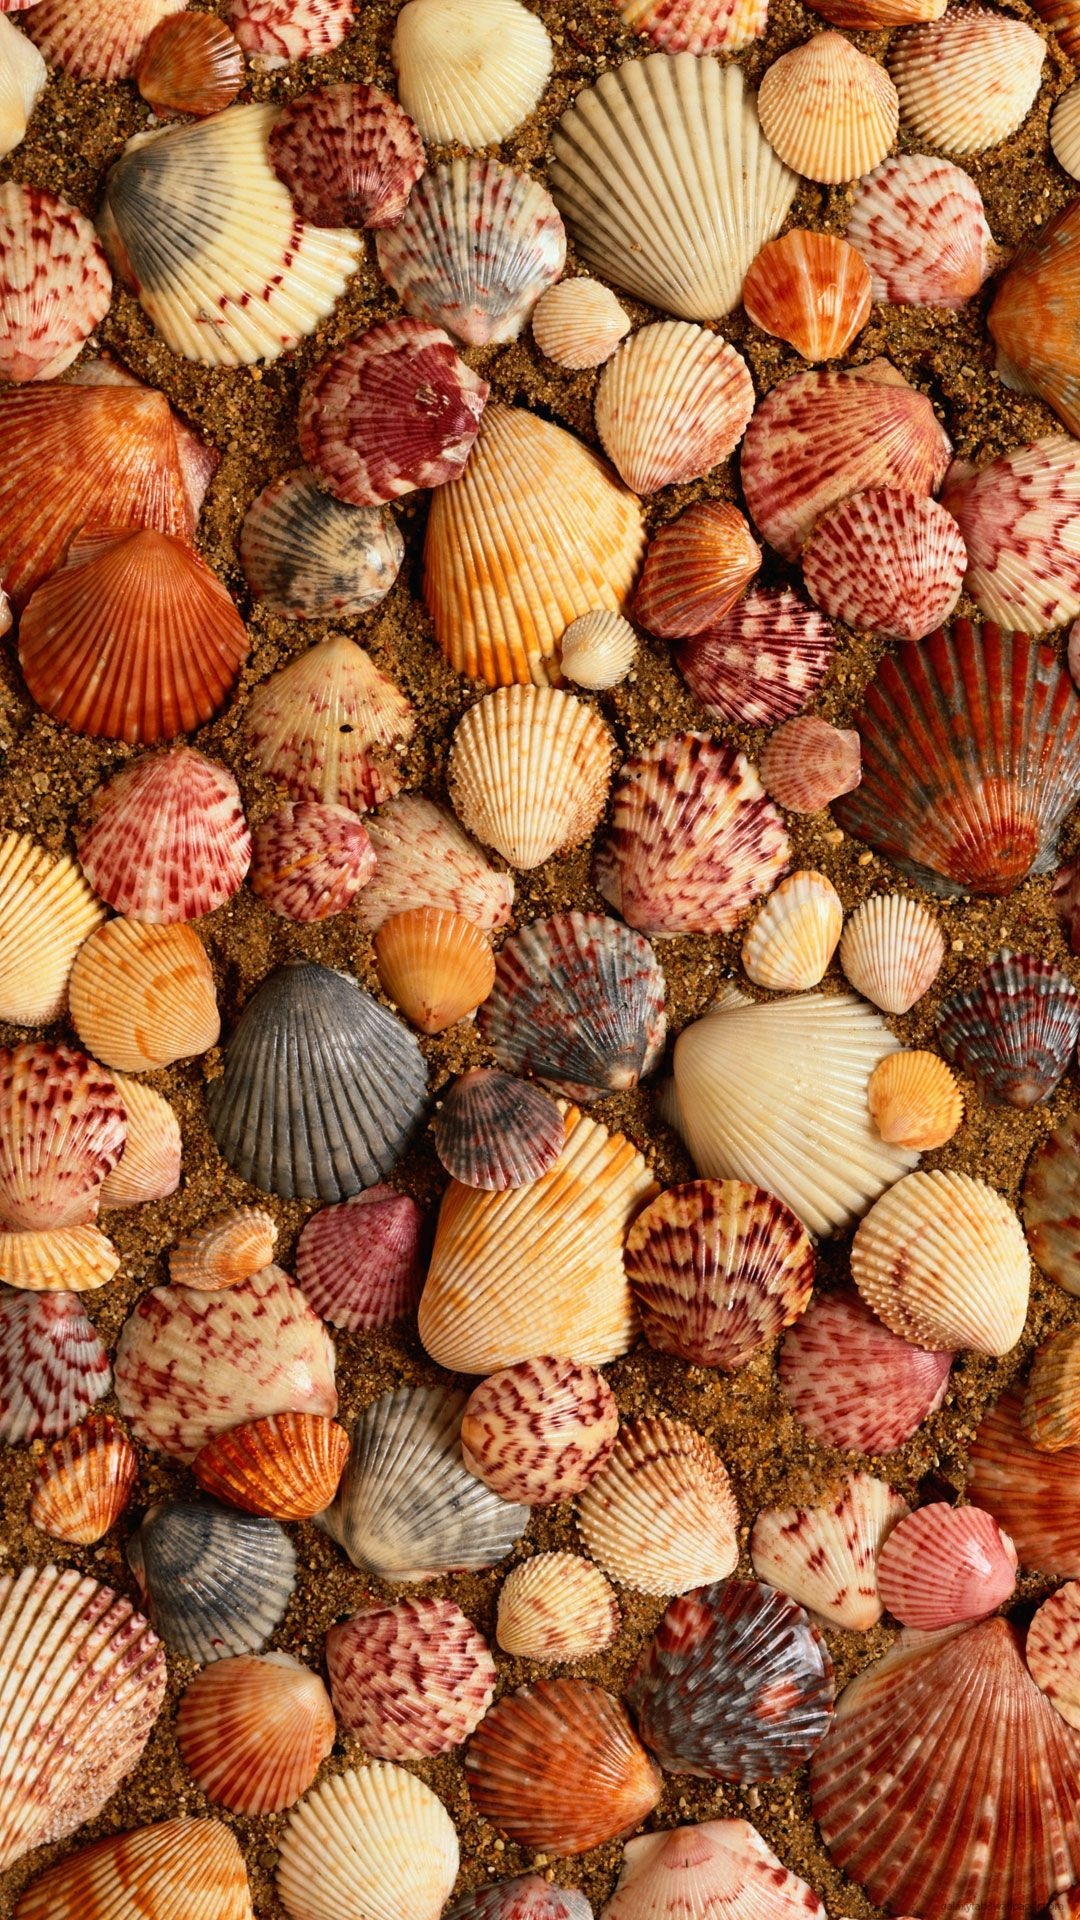 Sea Shell: The exoskeleton of the animals belonging to the mollusk phylum. 1080x1920 Full HD Wallpaper.